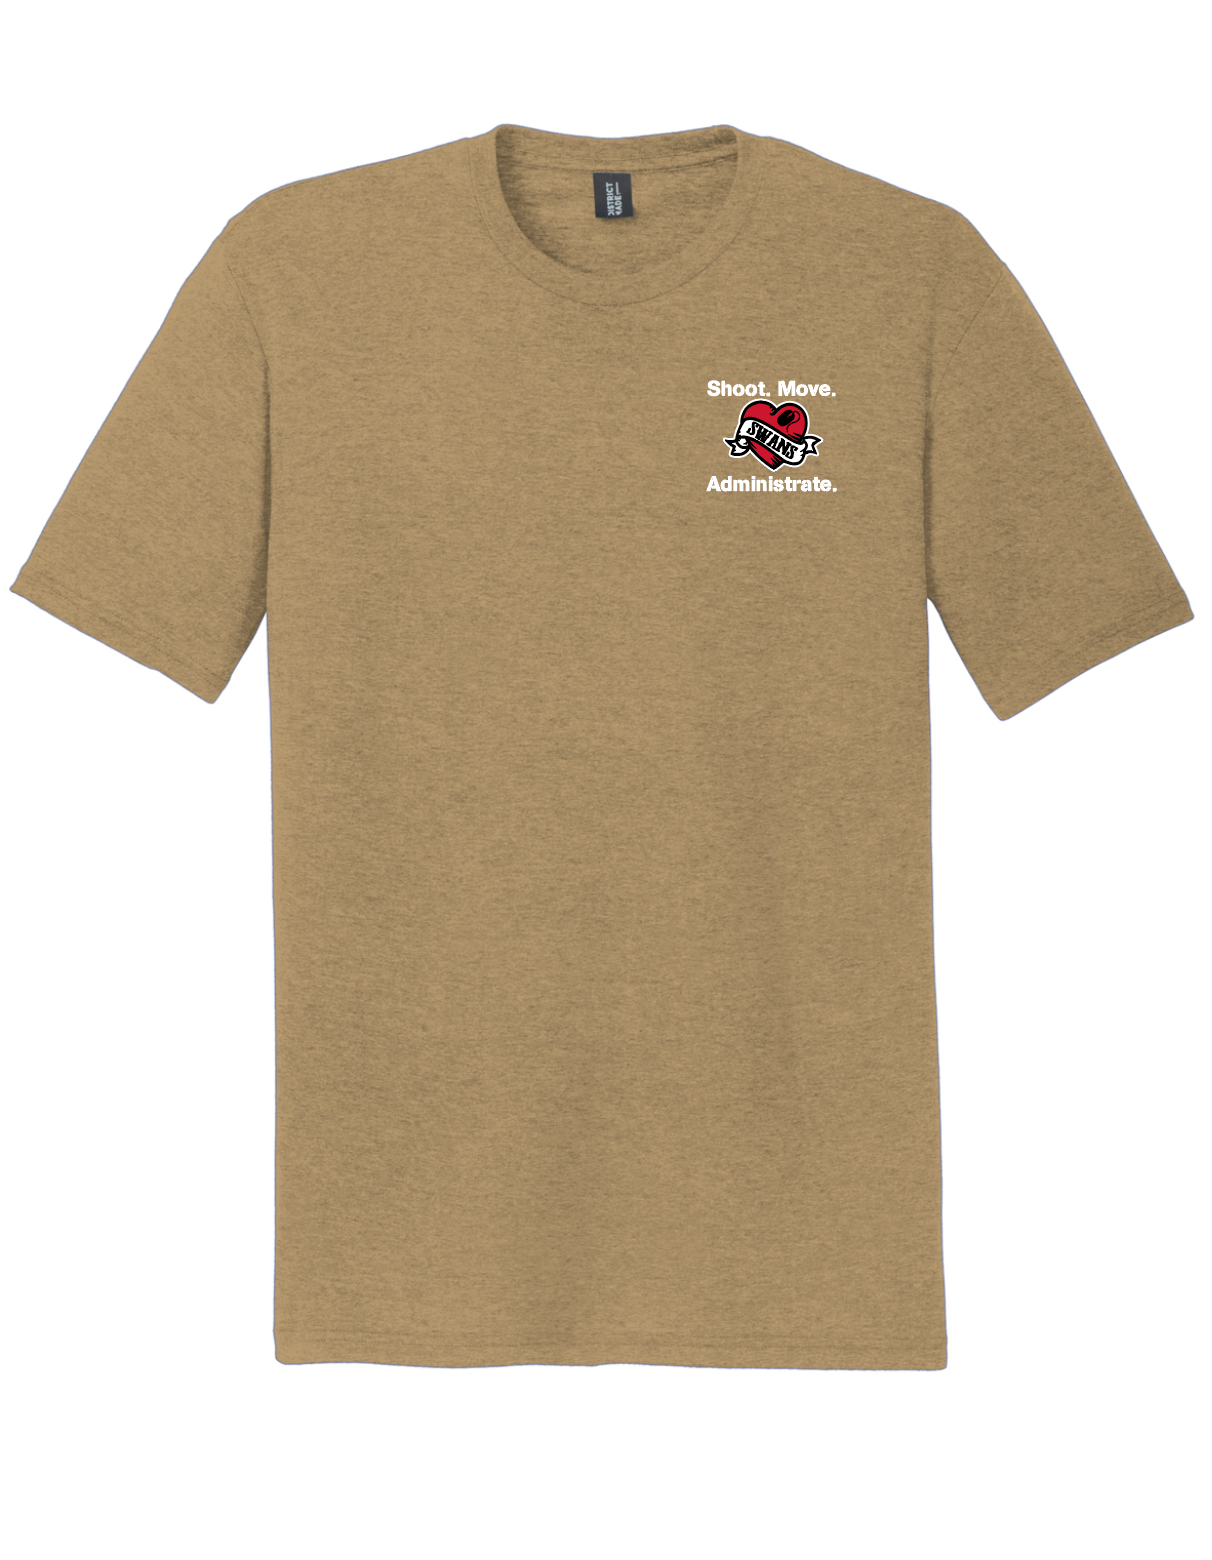 S1 Coyote Brown T Shirt